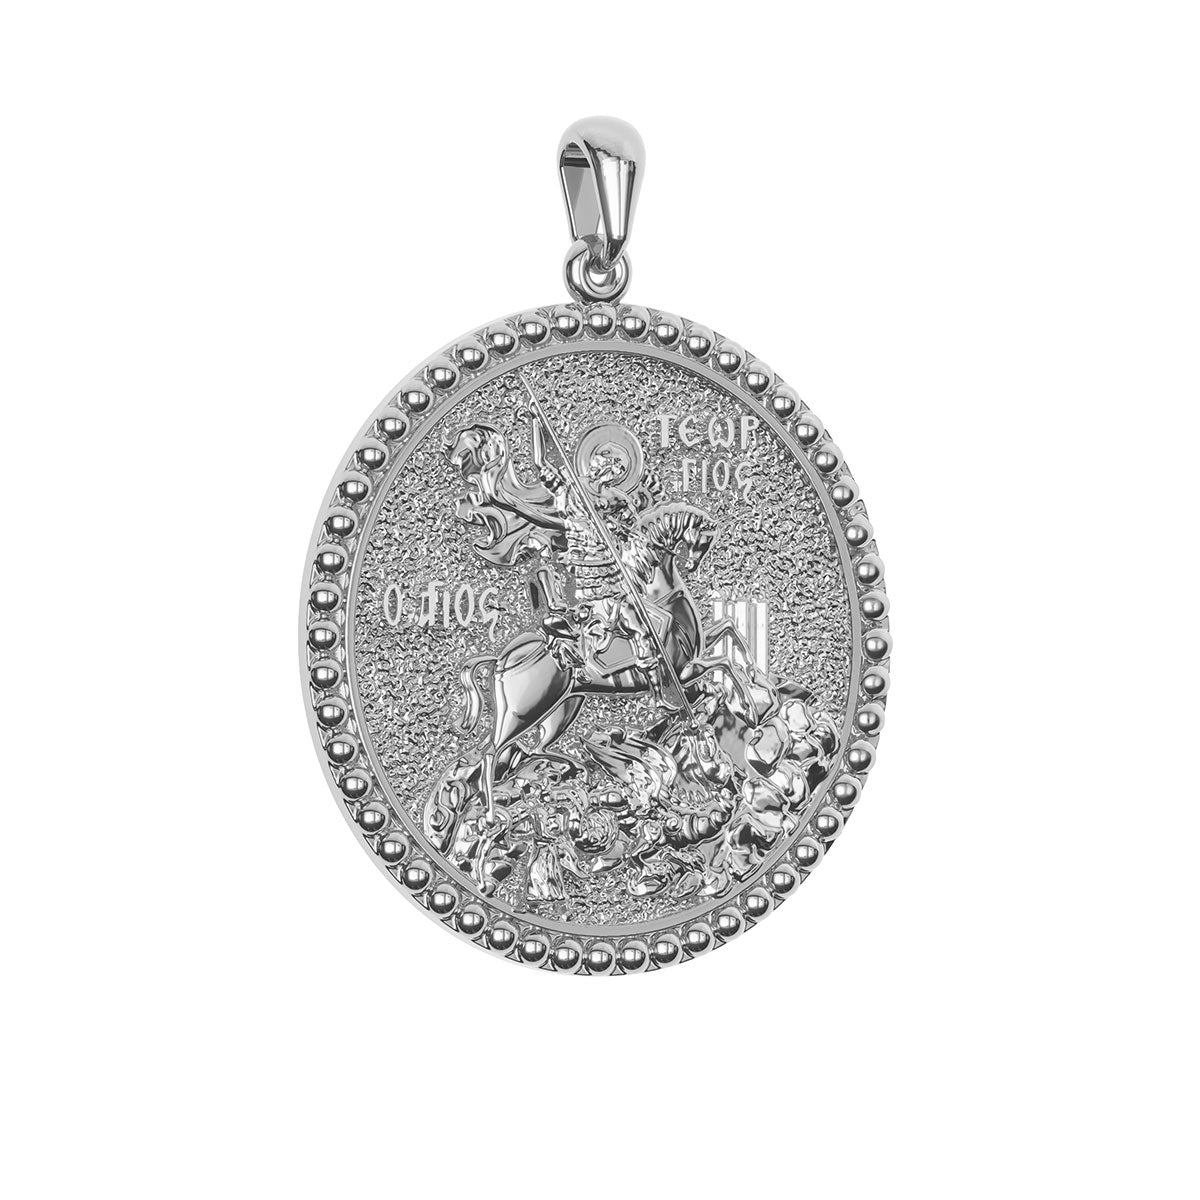 Saint George (Georgios) And the Dragon Sculpted Round Medal